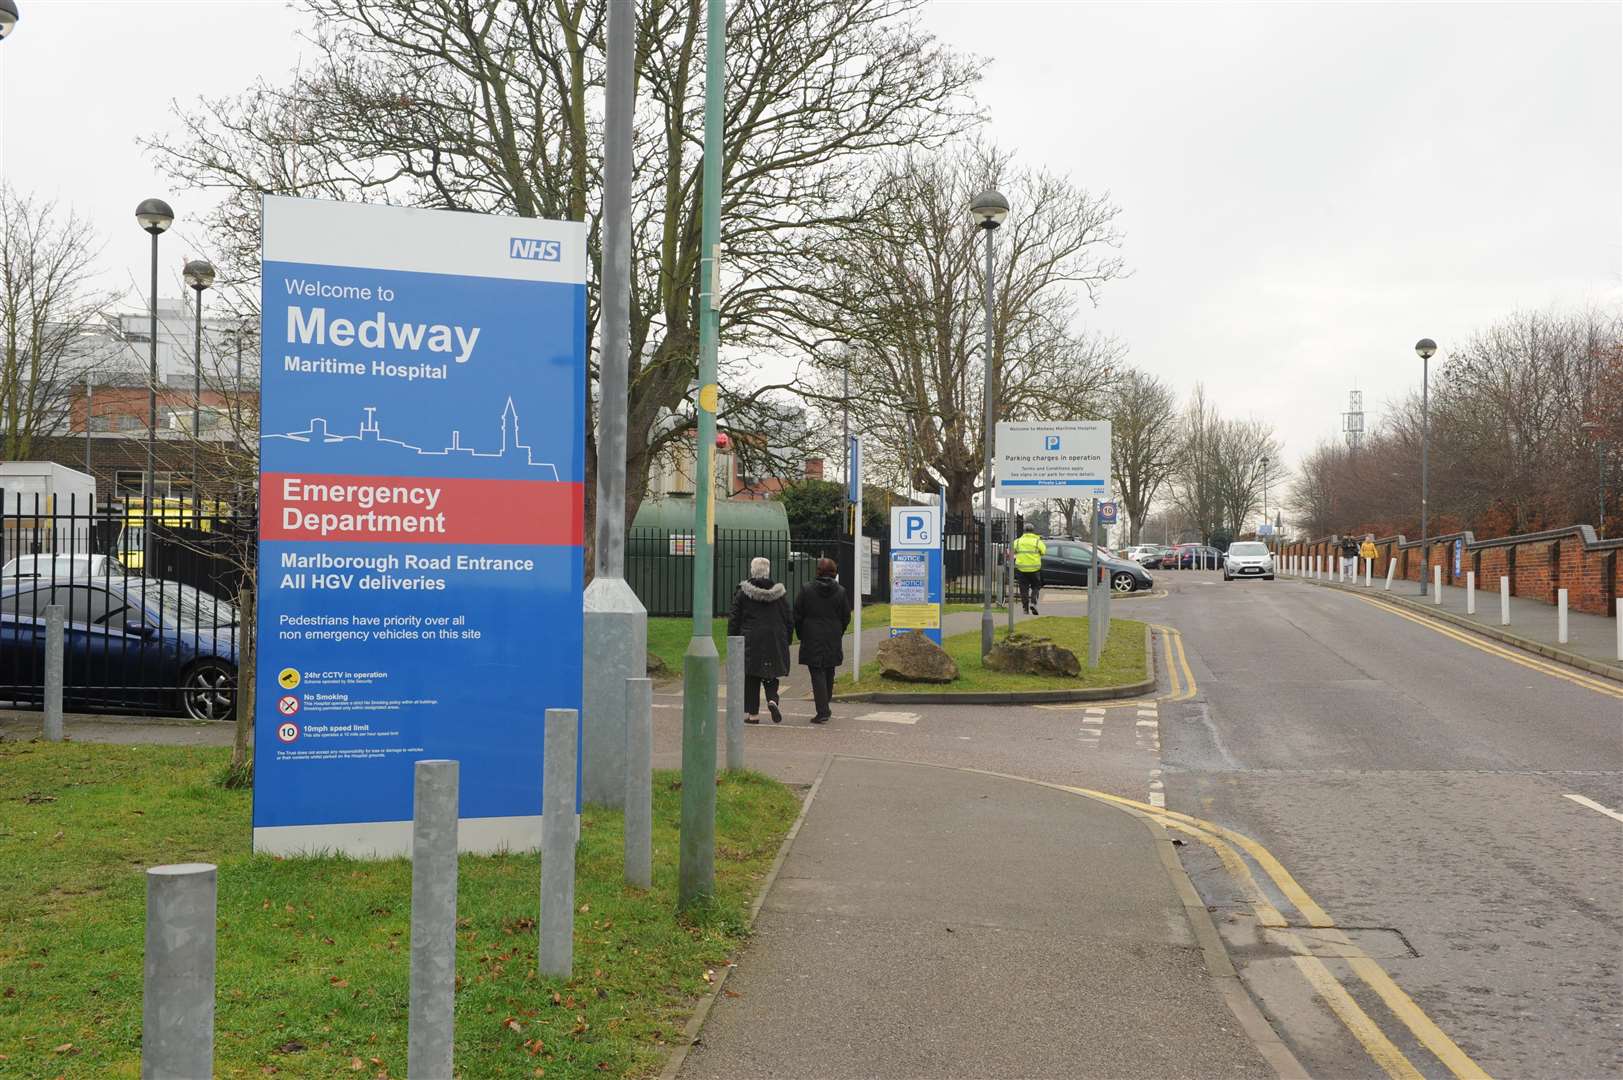 Medway Maritime Hospital came out of special measures two years ago